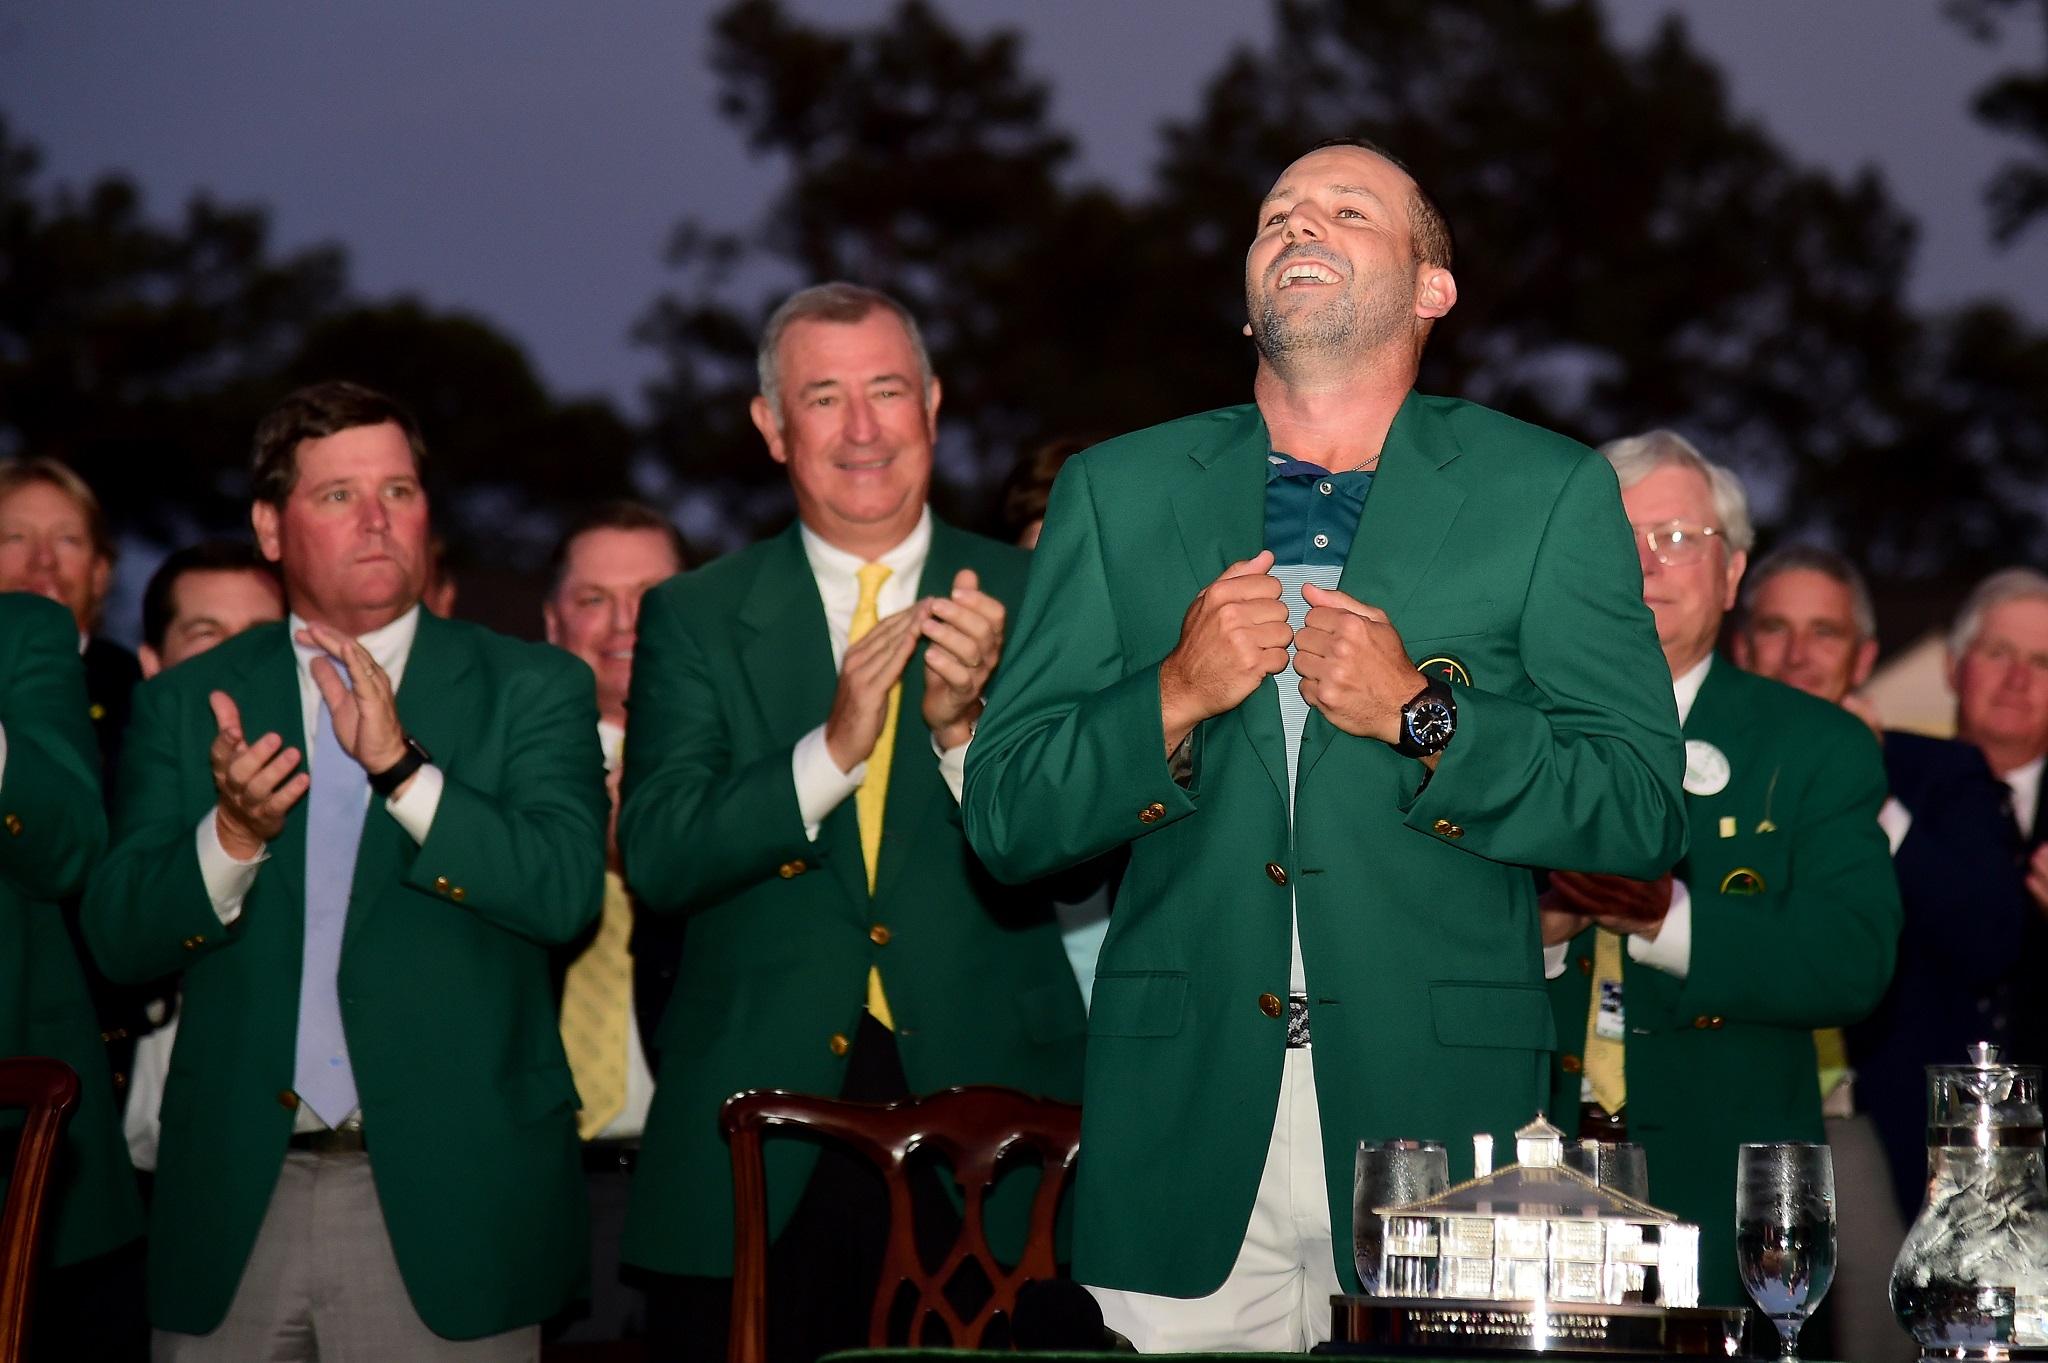 Sergio Garcia paid tribute to Seve Ballesteros after winning the Masters